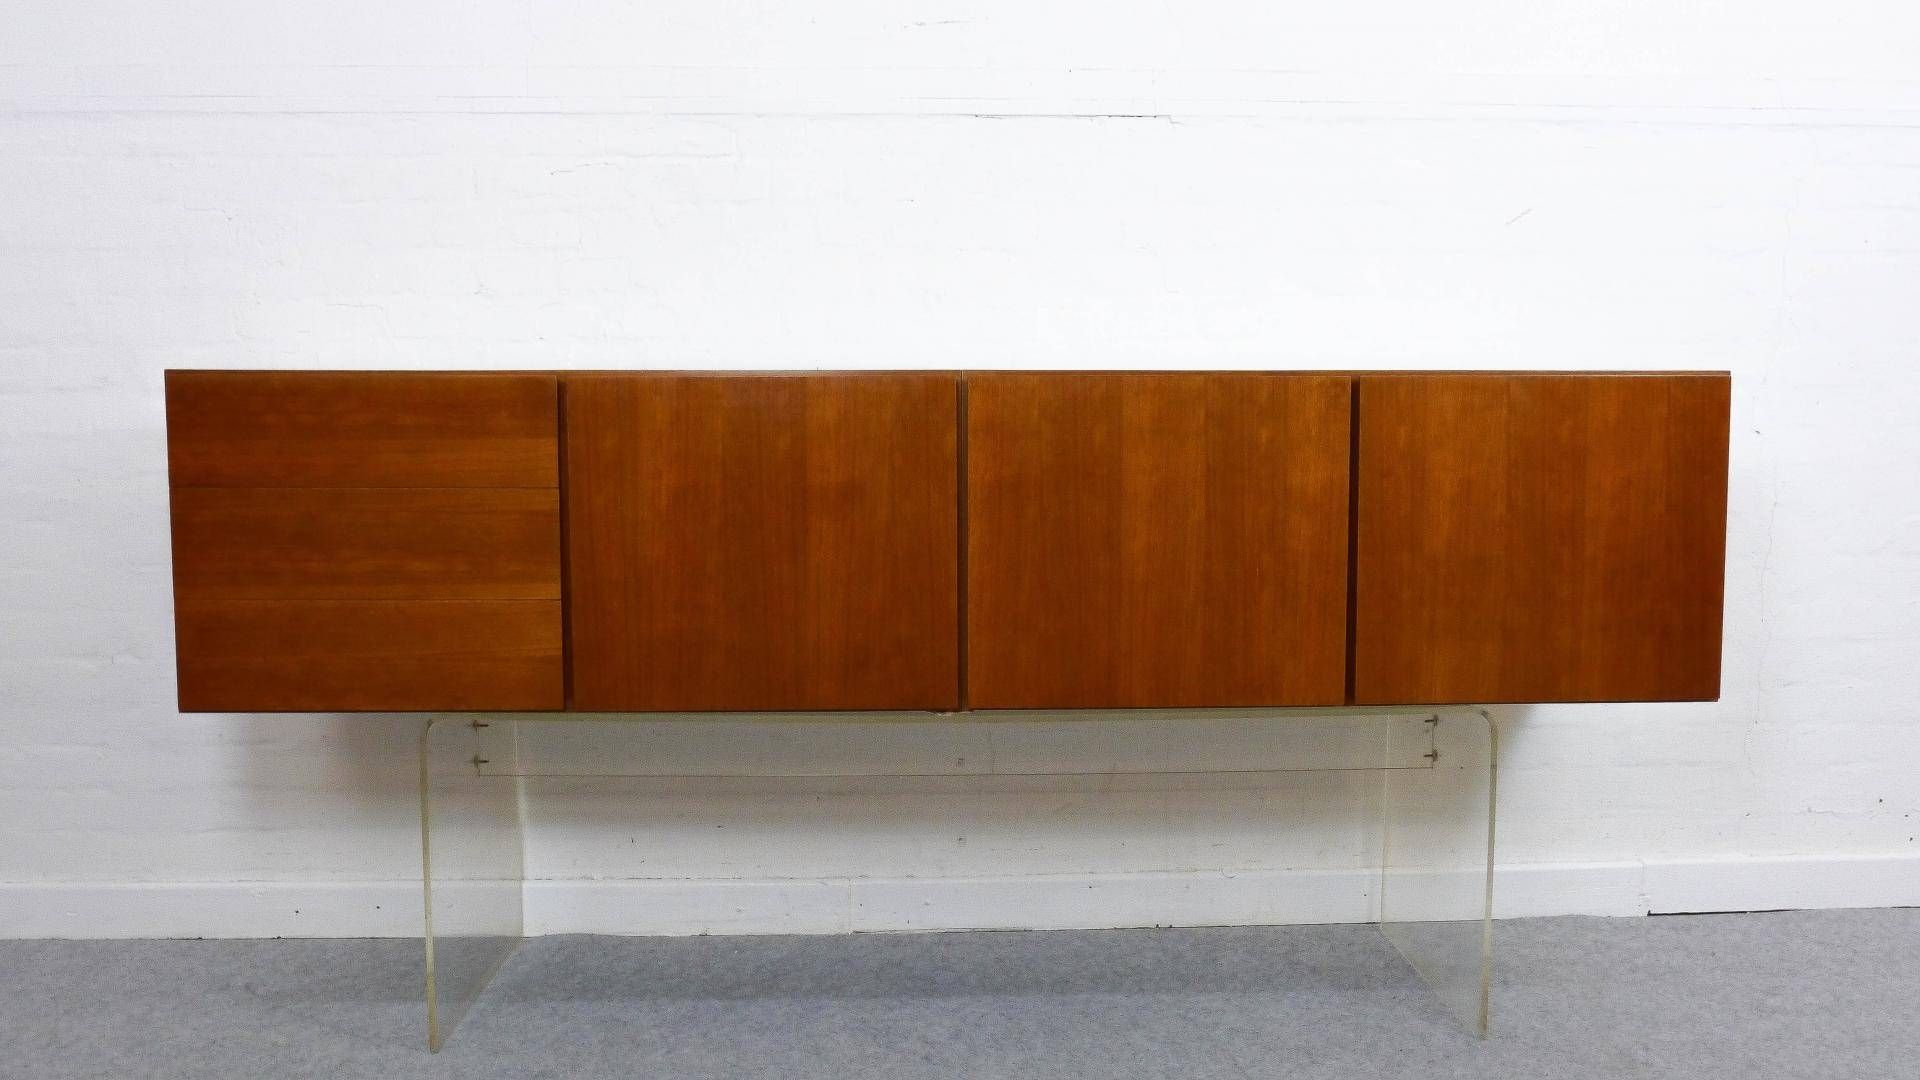 Wall Mounted Sideboard, 1960s For Sale At Pamono Throughout Newest Wall Mounted Sideboards (View 11 of 15)